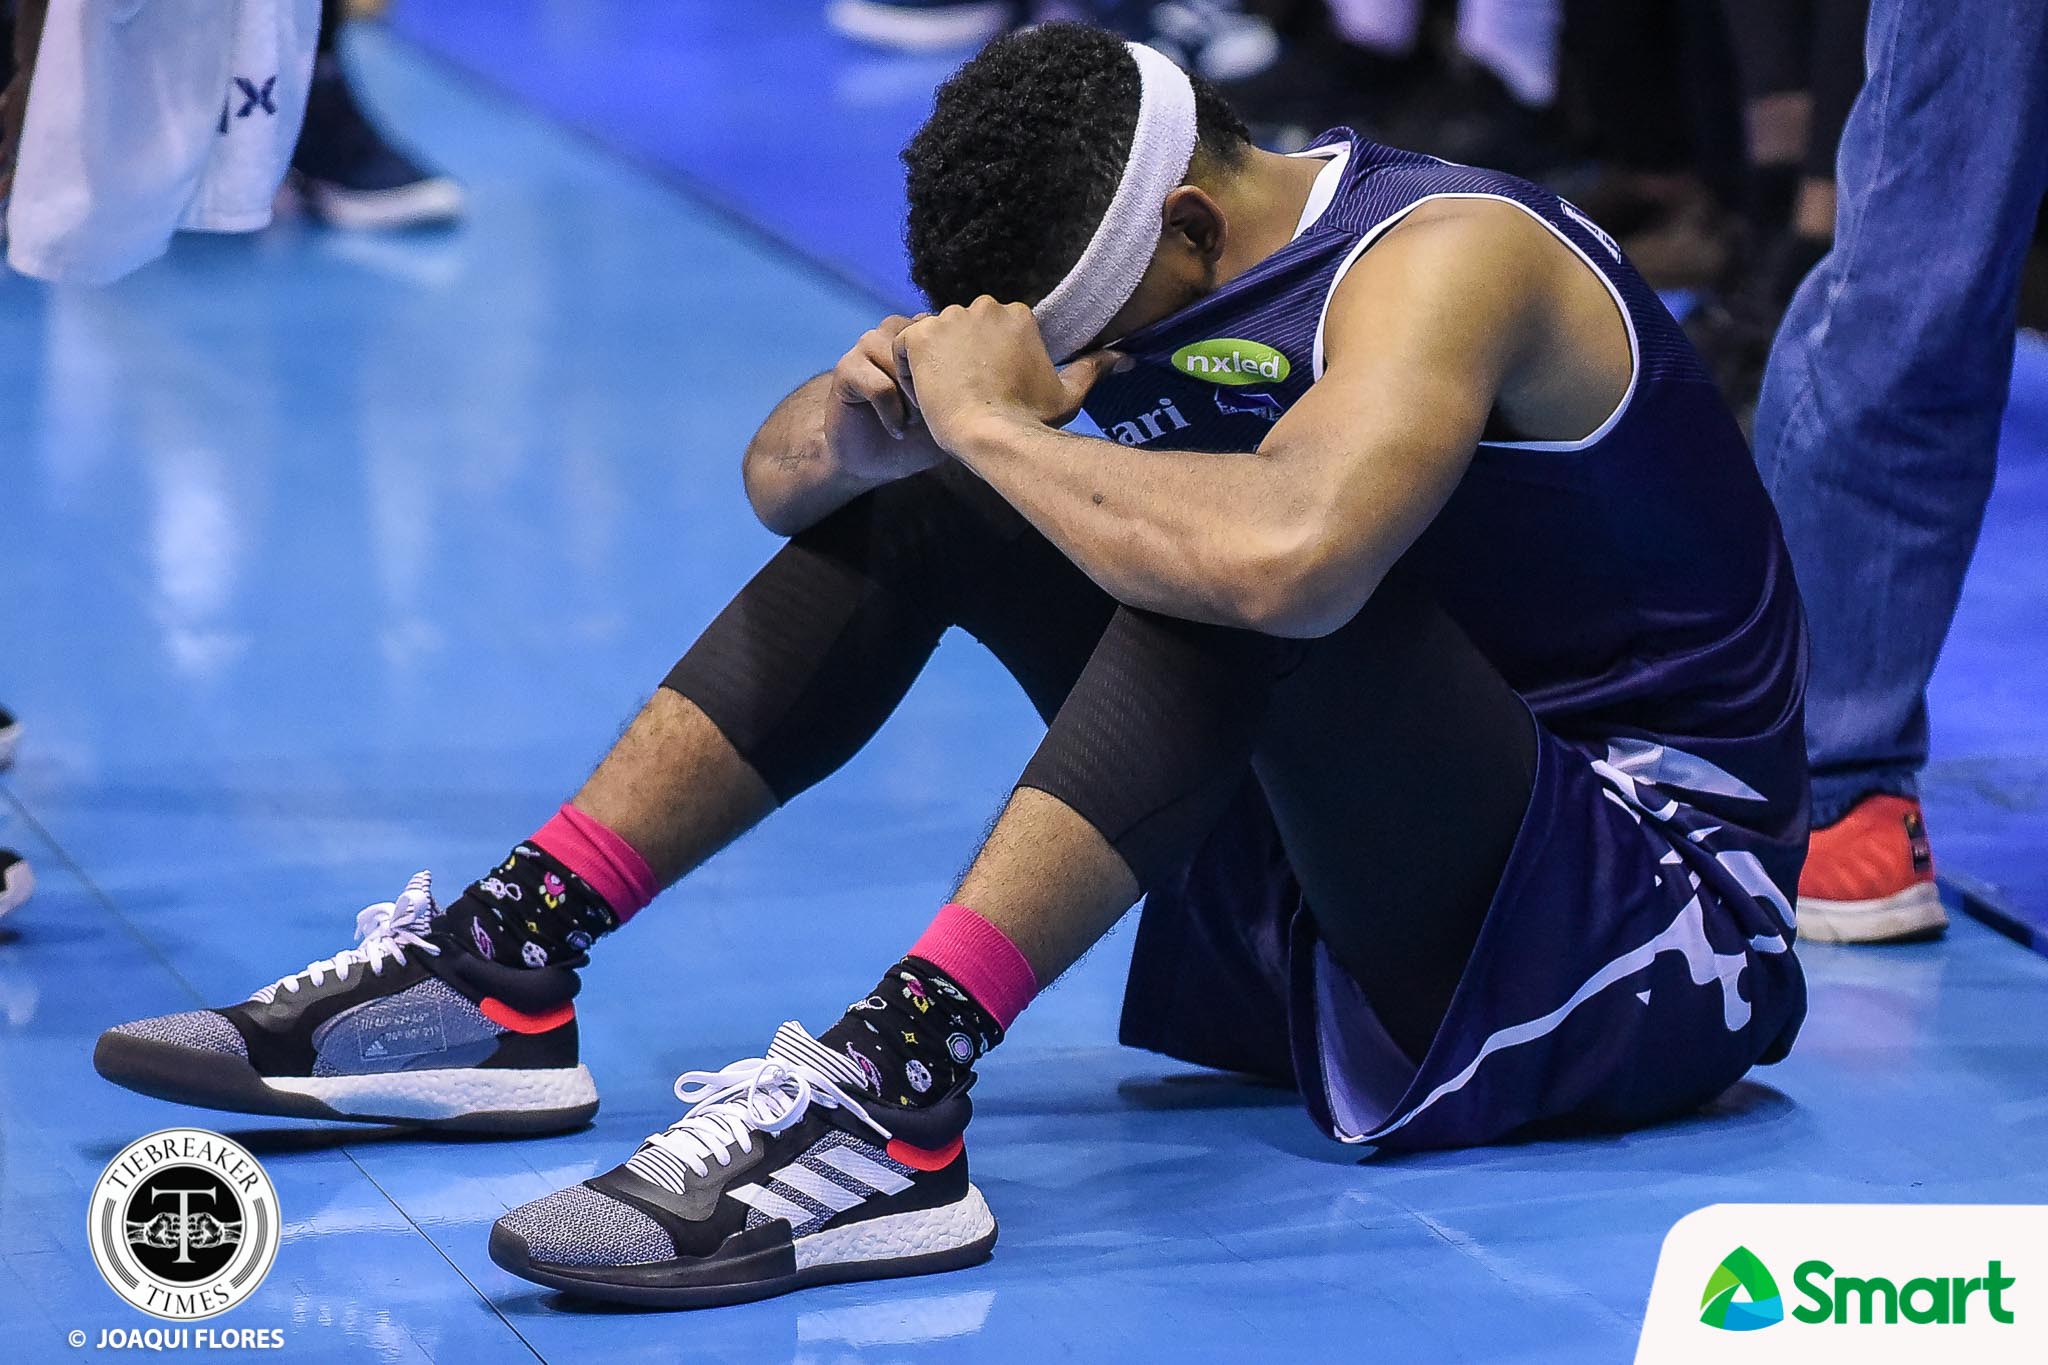 UAAP-81-Final-Four-ADU-vs.-UP-Ahanmisi-0242 After missing Final Four, Jerrick Ahanmisi vows to return for final year AdU Basketball News UAAP  - philippine sports news